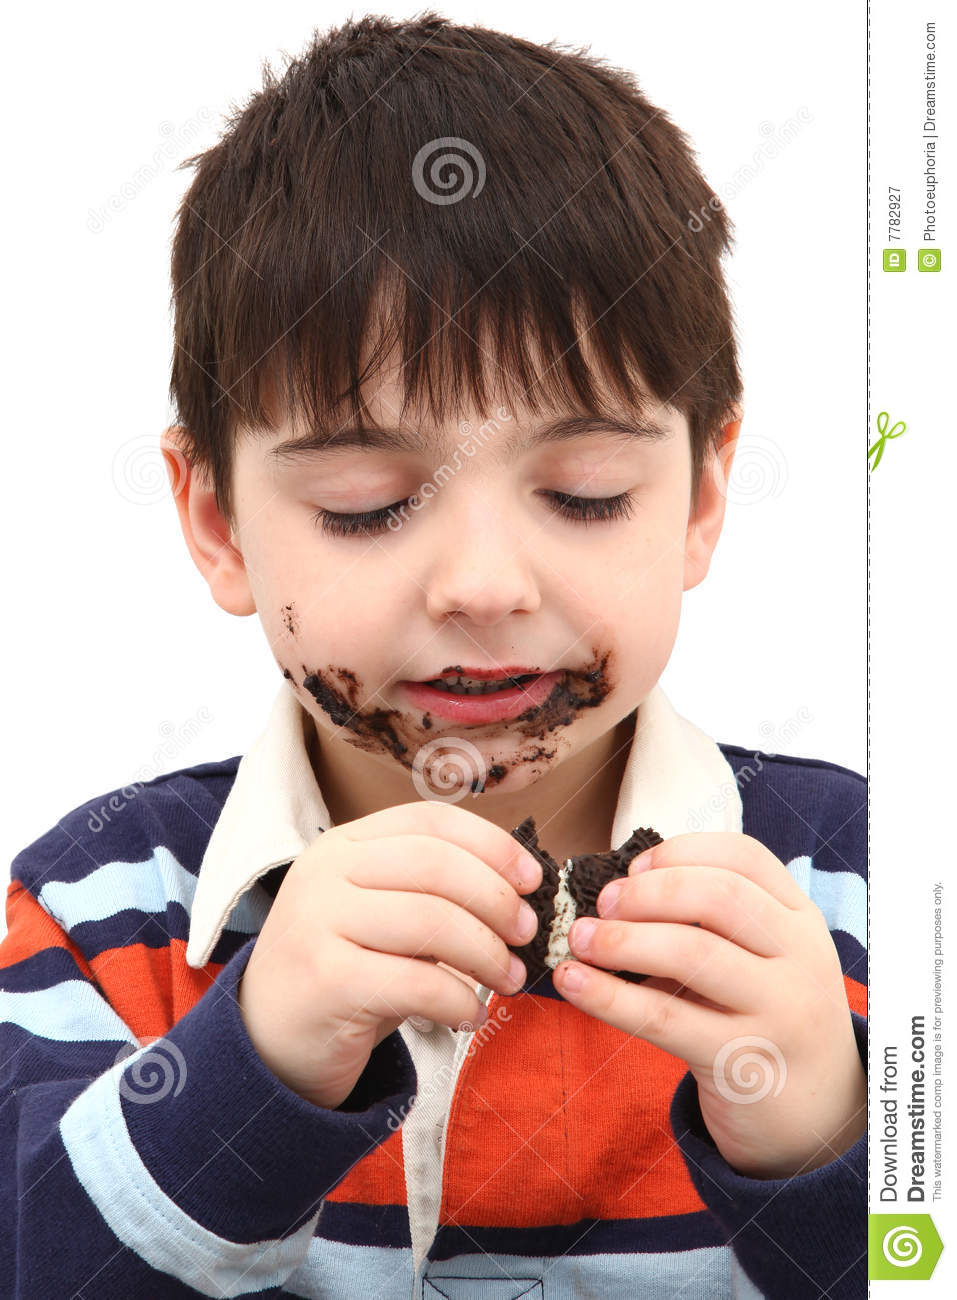 Adorable Boy Eating Cookies Royalty Free Stock Photography   Image